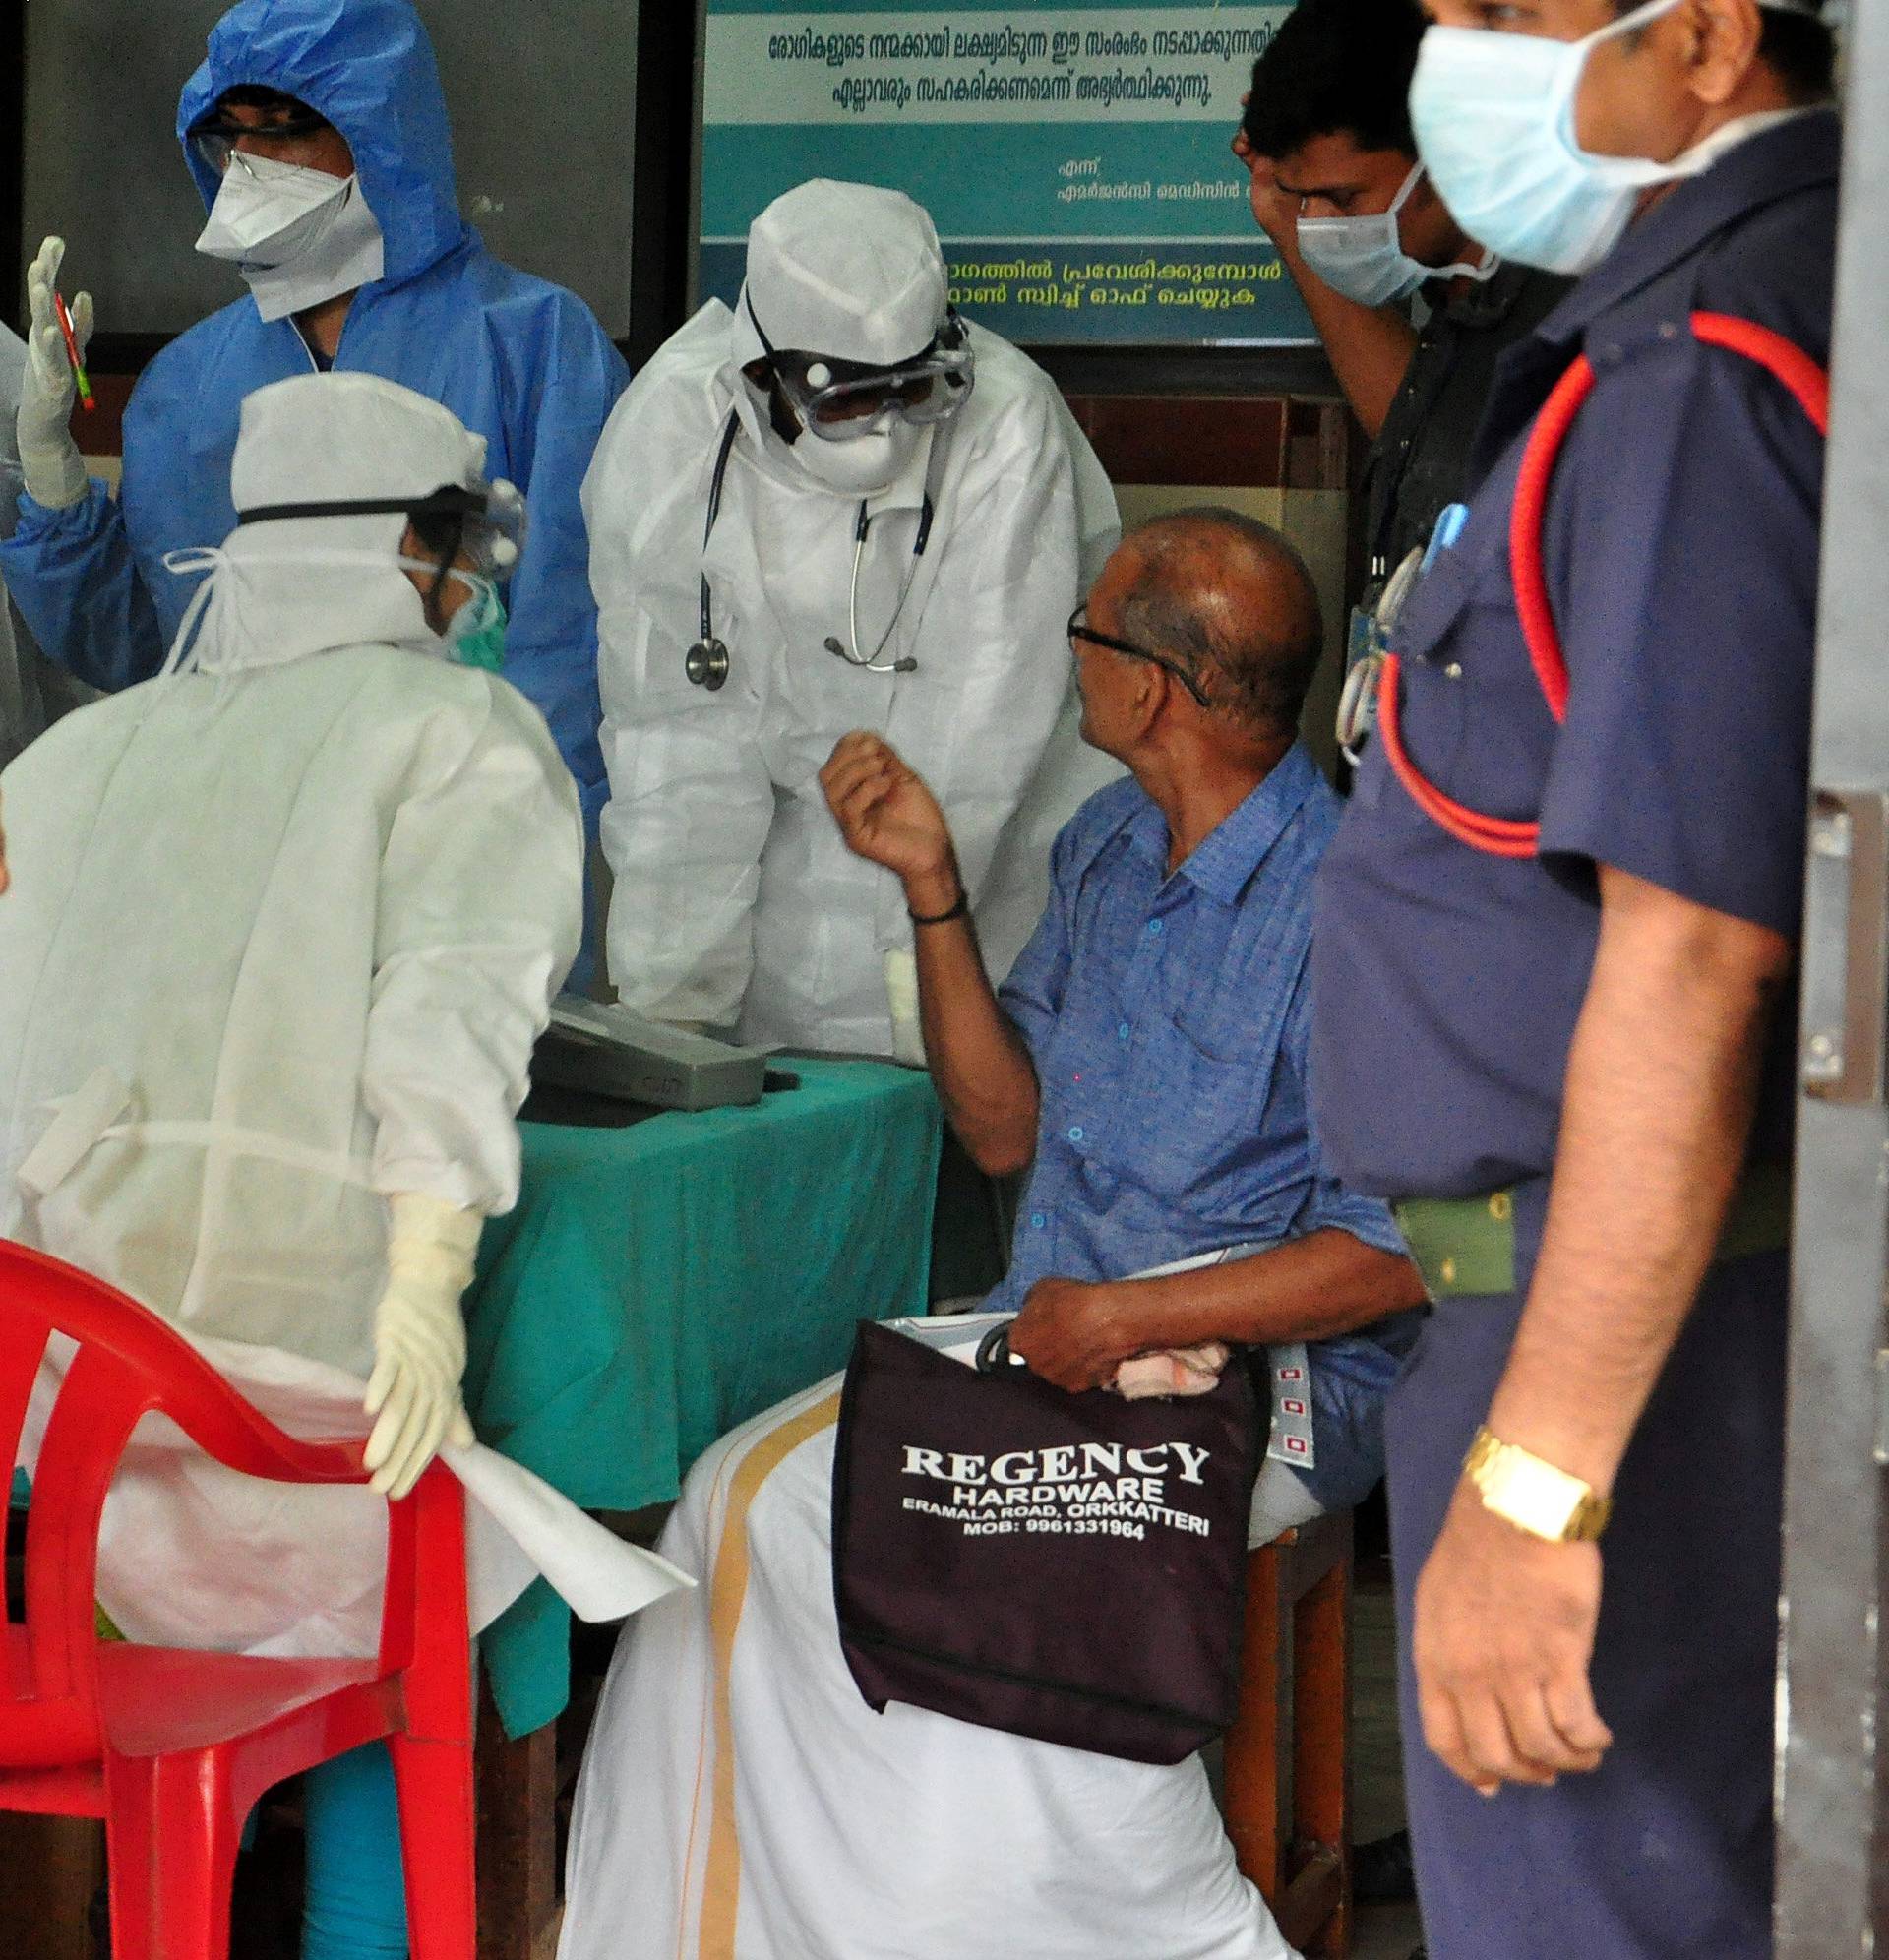 Medics wearing protective gear examine a patient at a hospital in Kozhikode in the southern state of Kerala